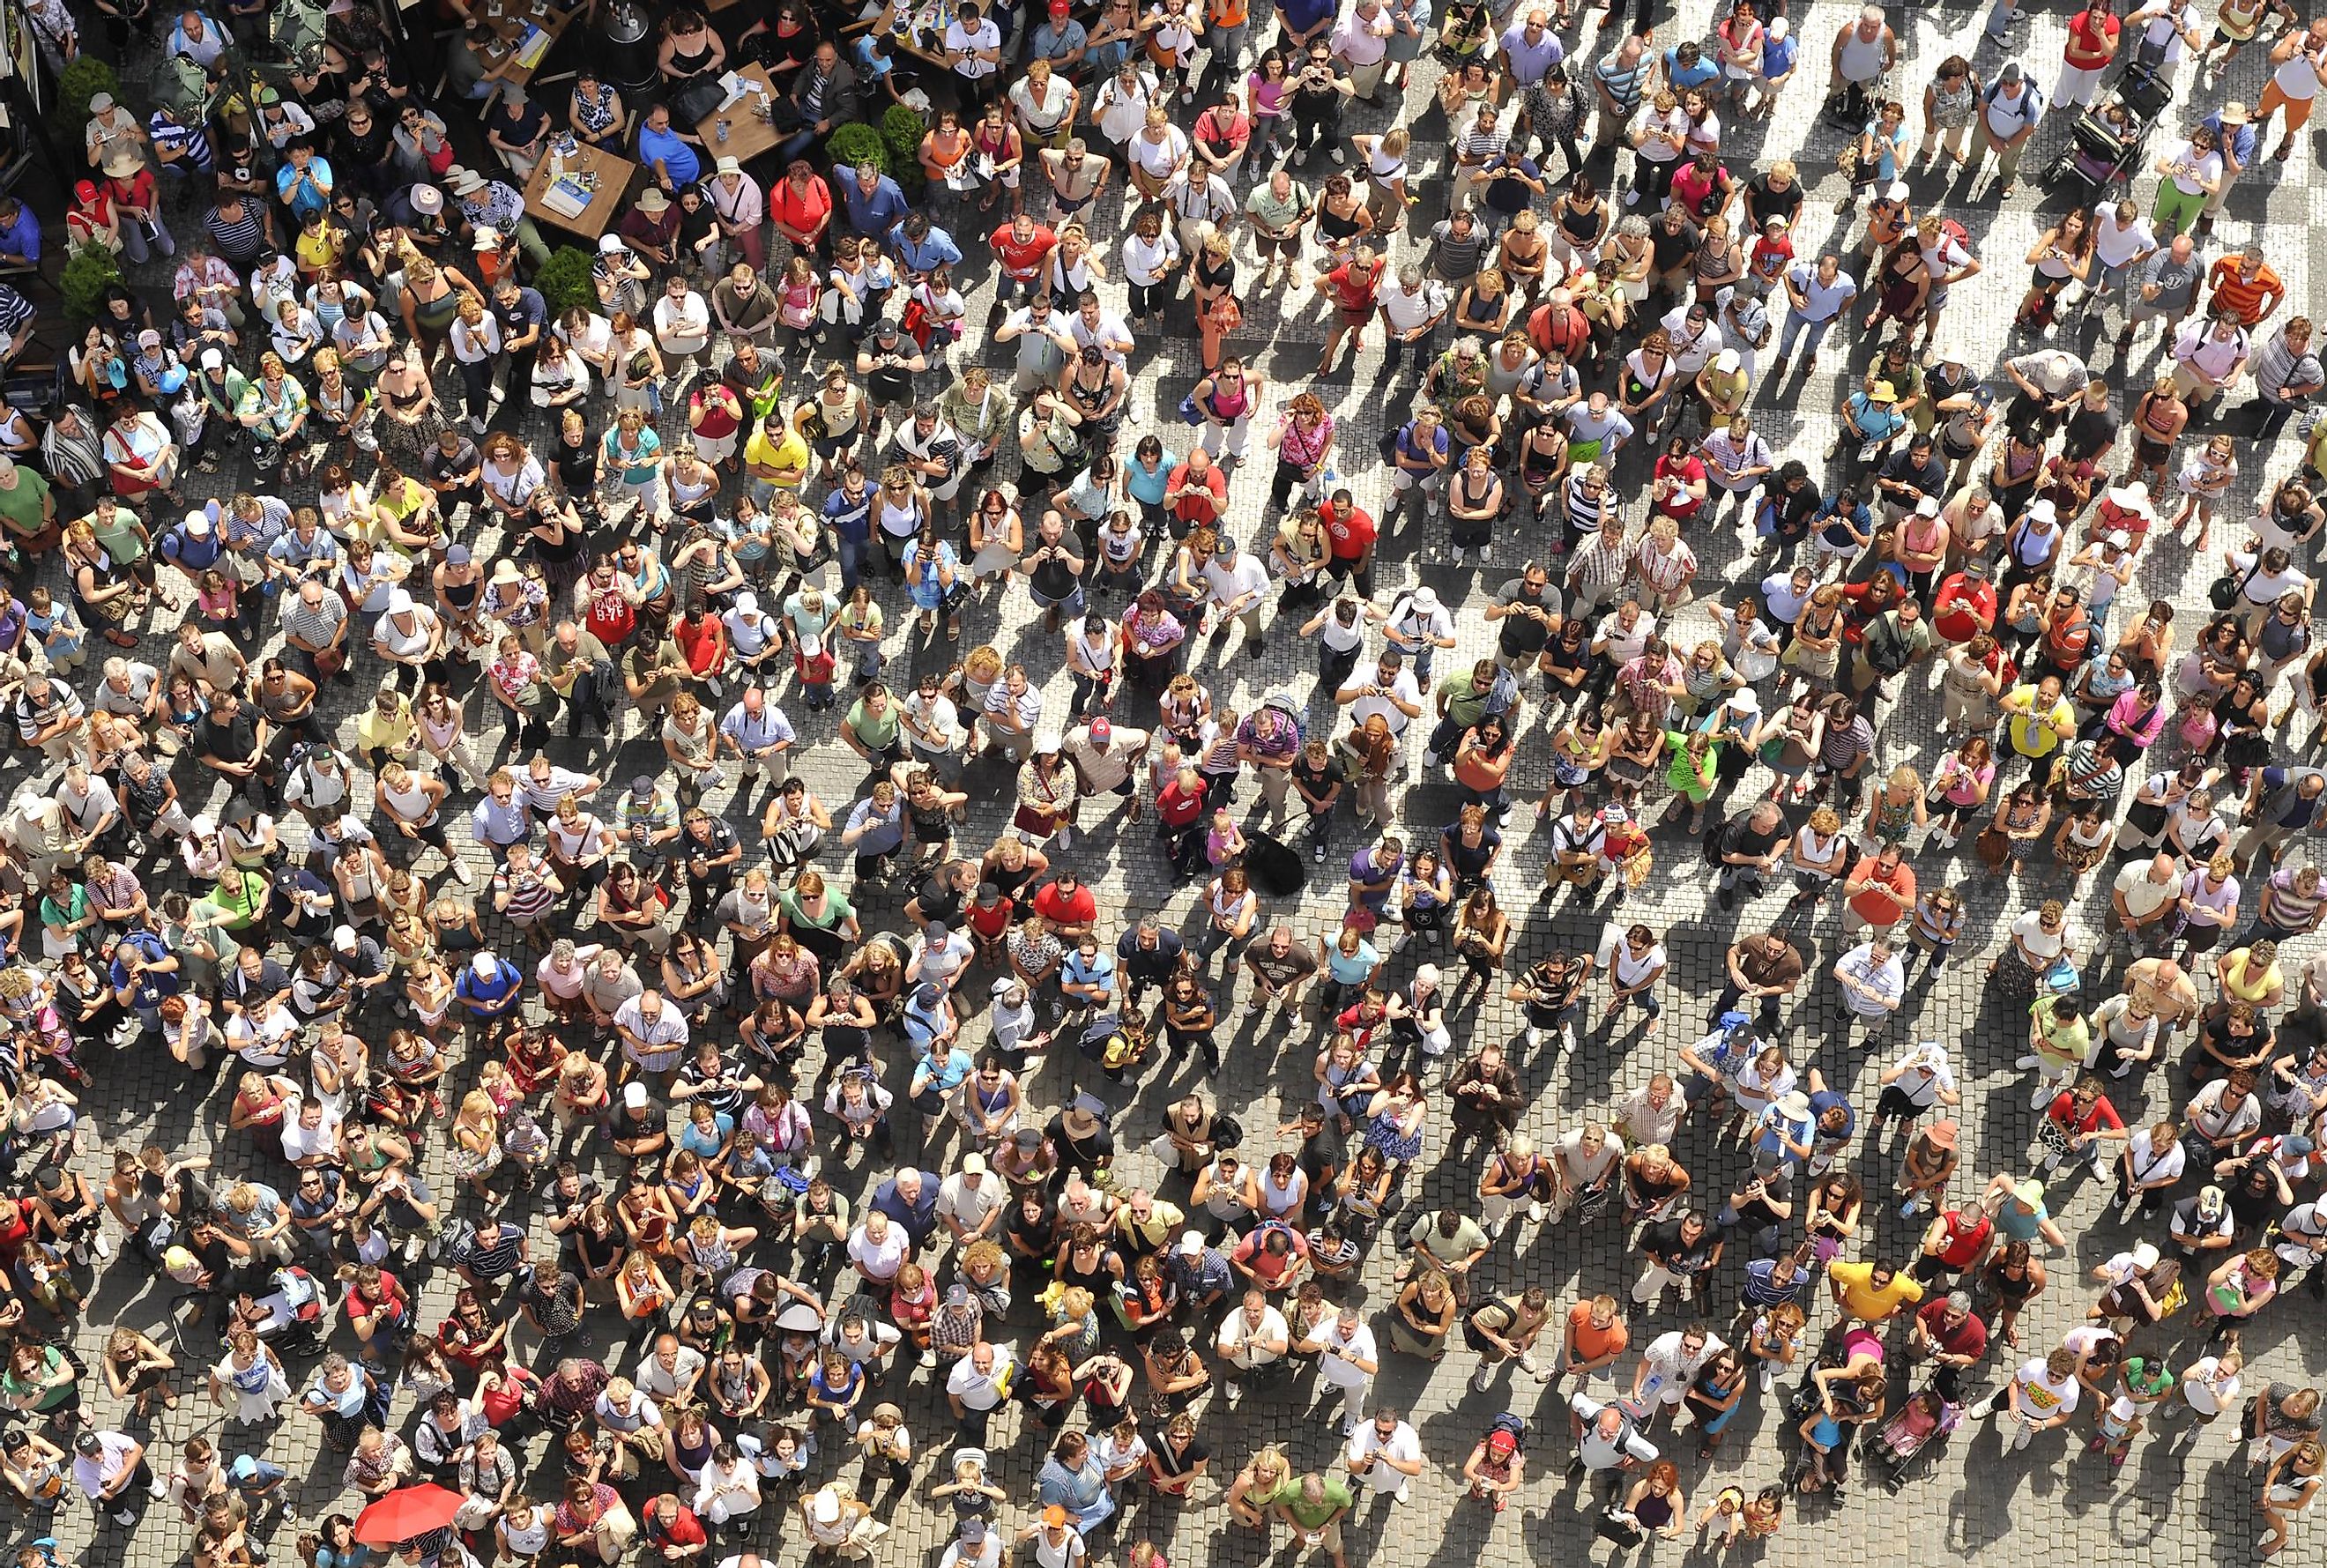 Humans are the most populous mammals on Earth.